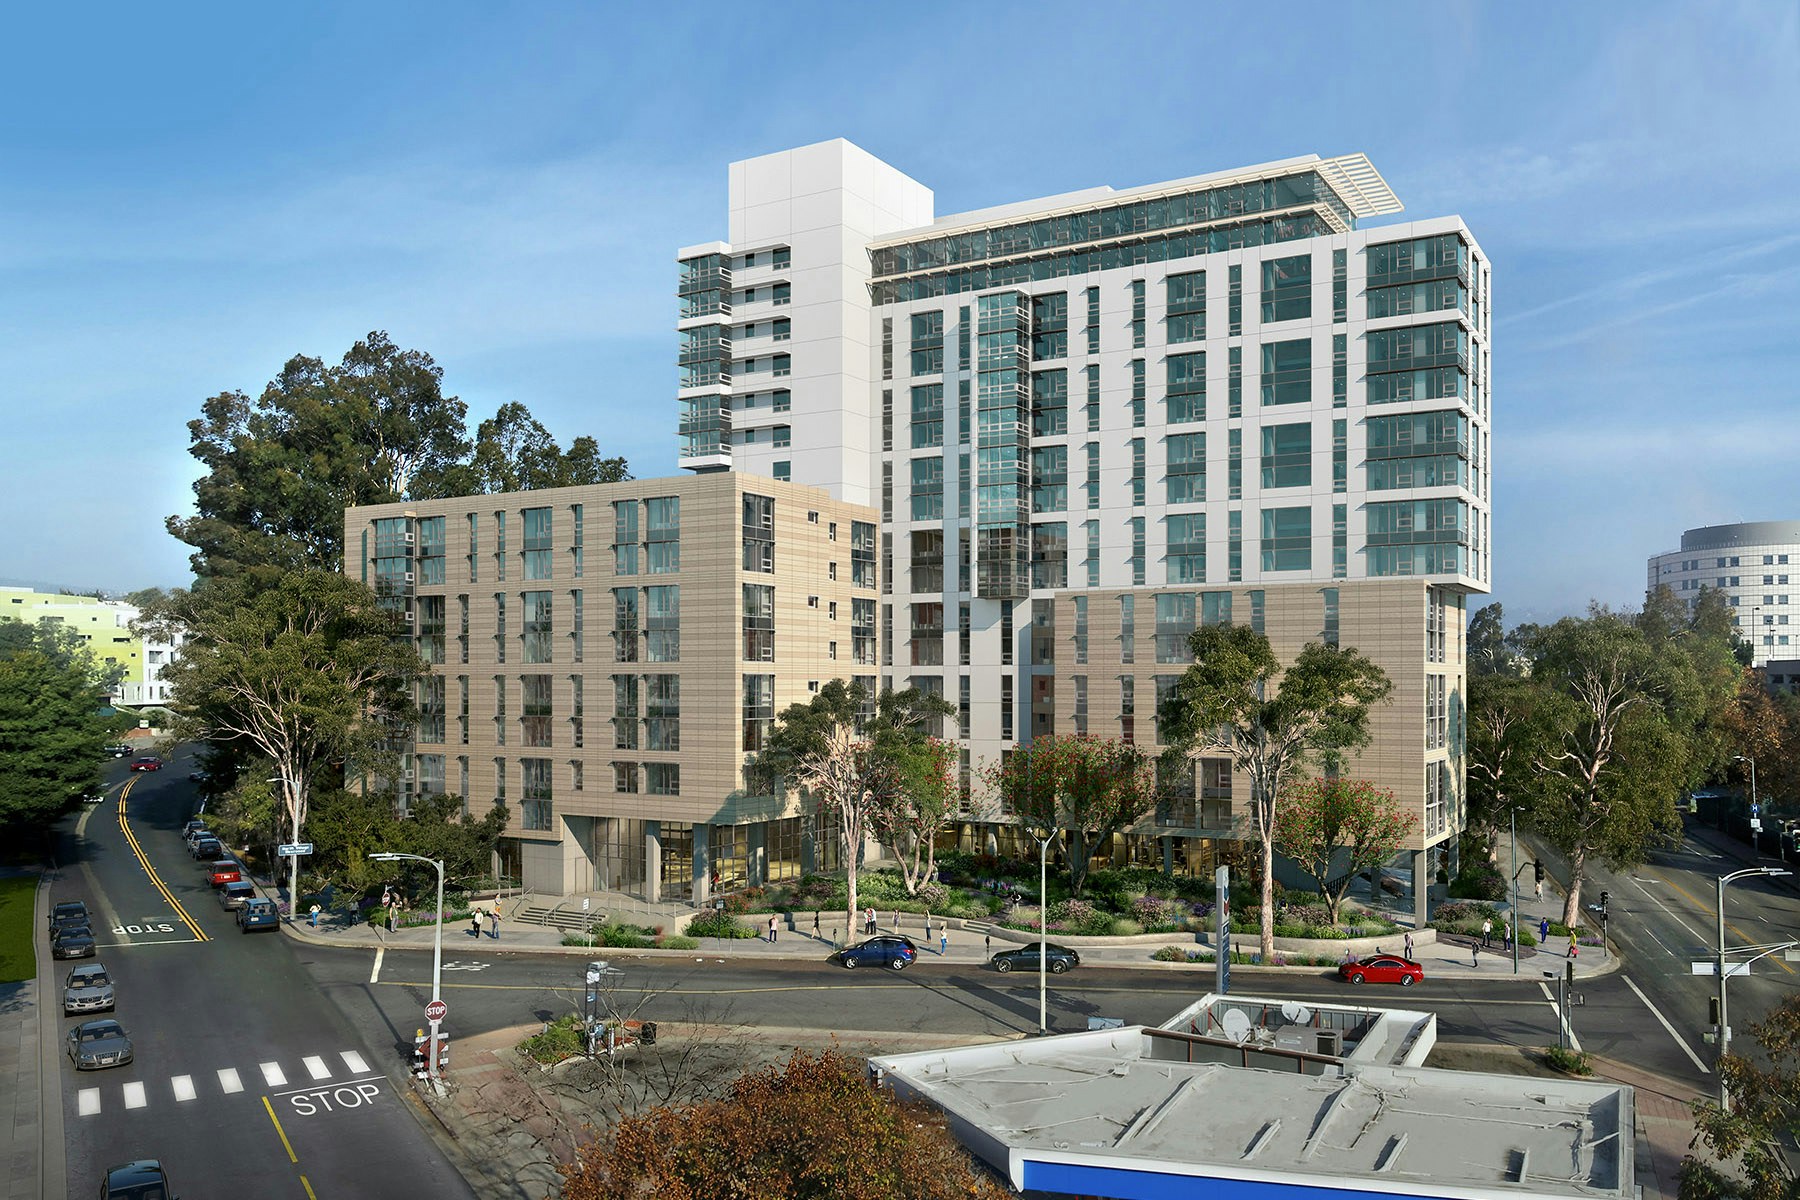 Student Housing Continues to Rise Around the UCLA Campus STUDIOS